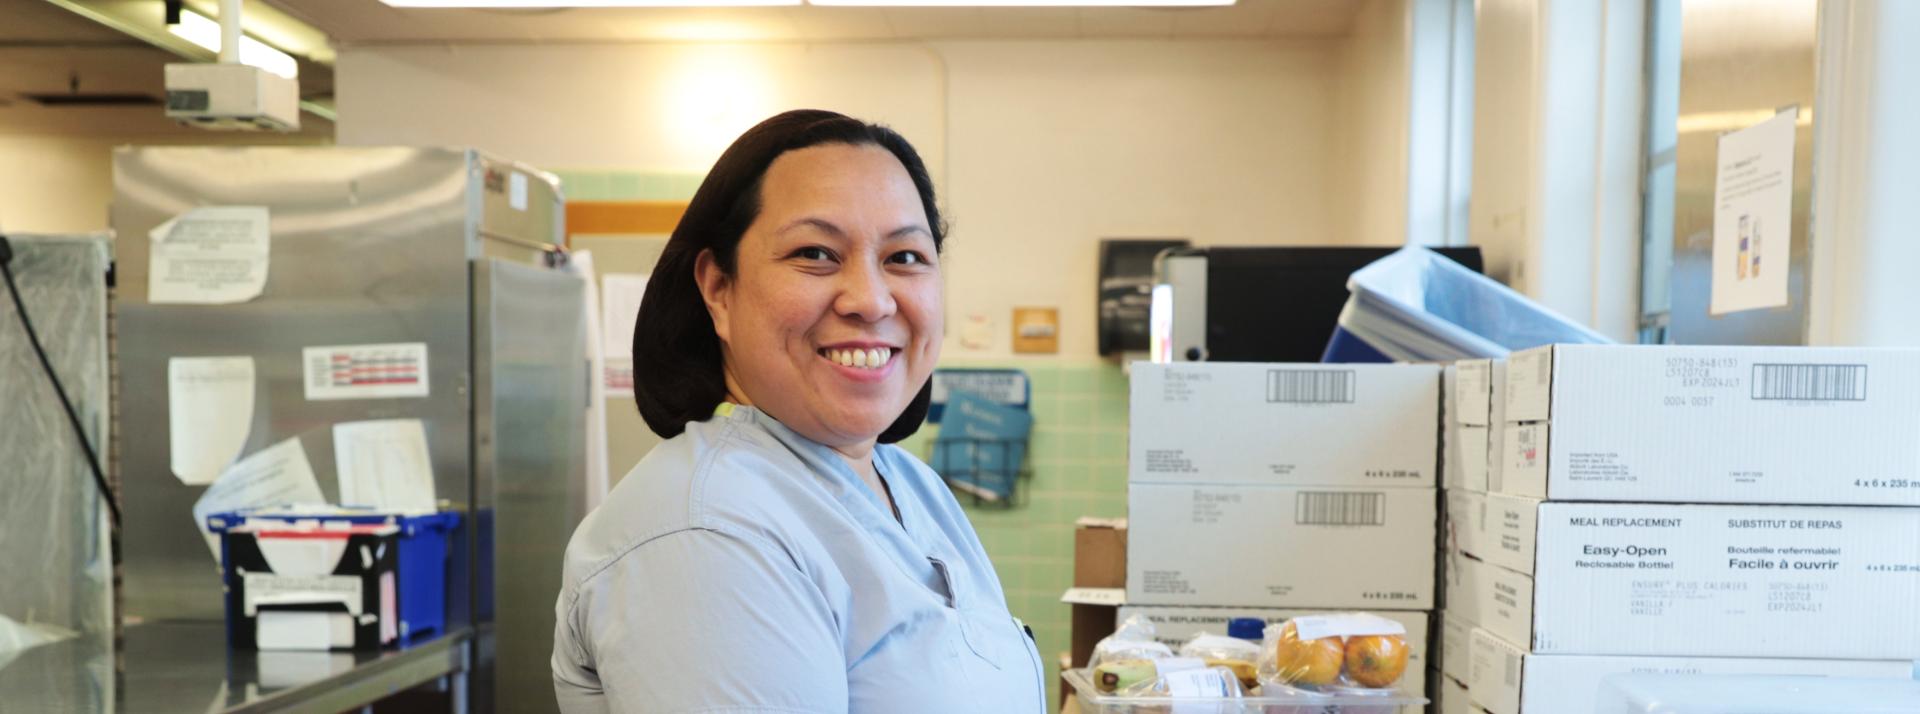 A facilities worker smiling in a kitchen